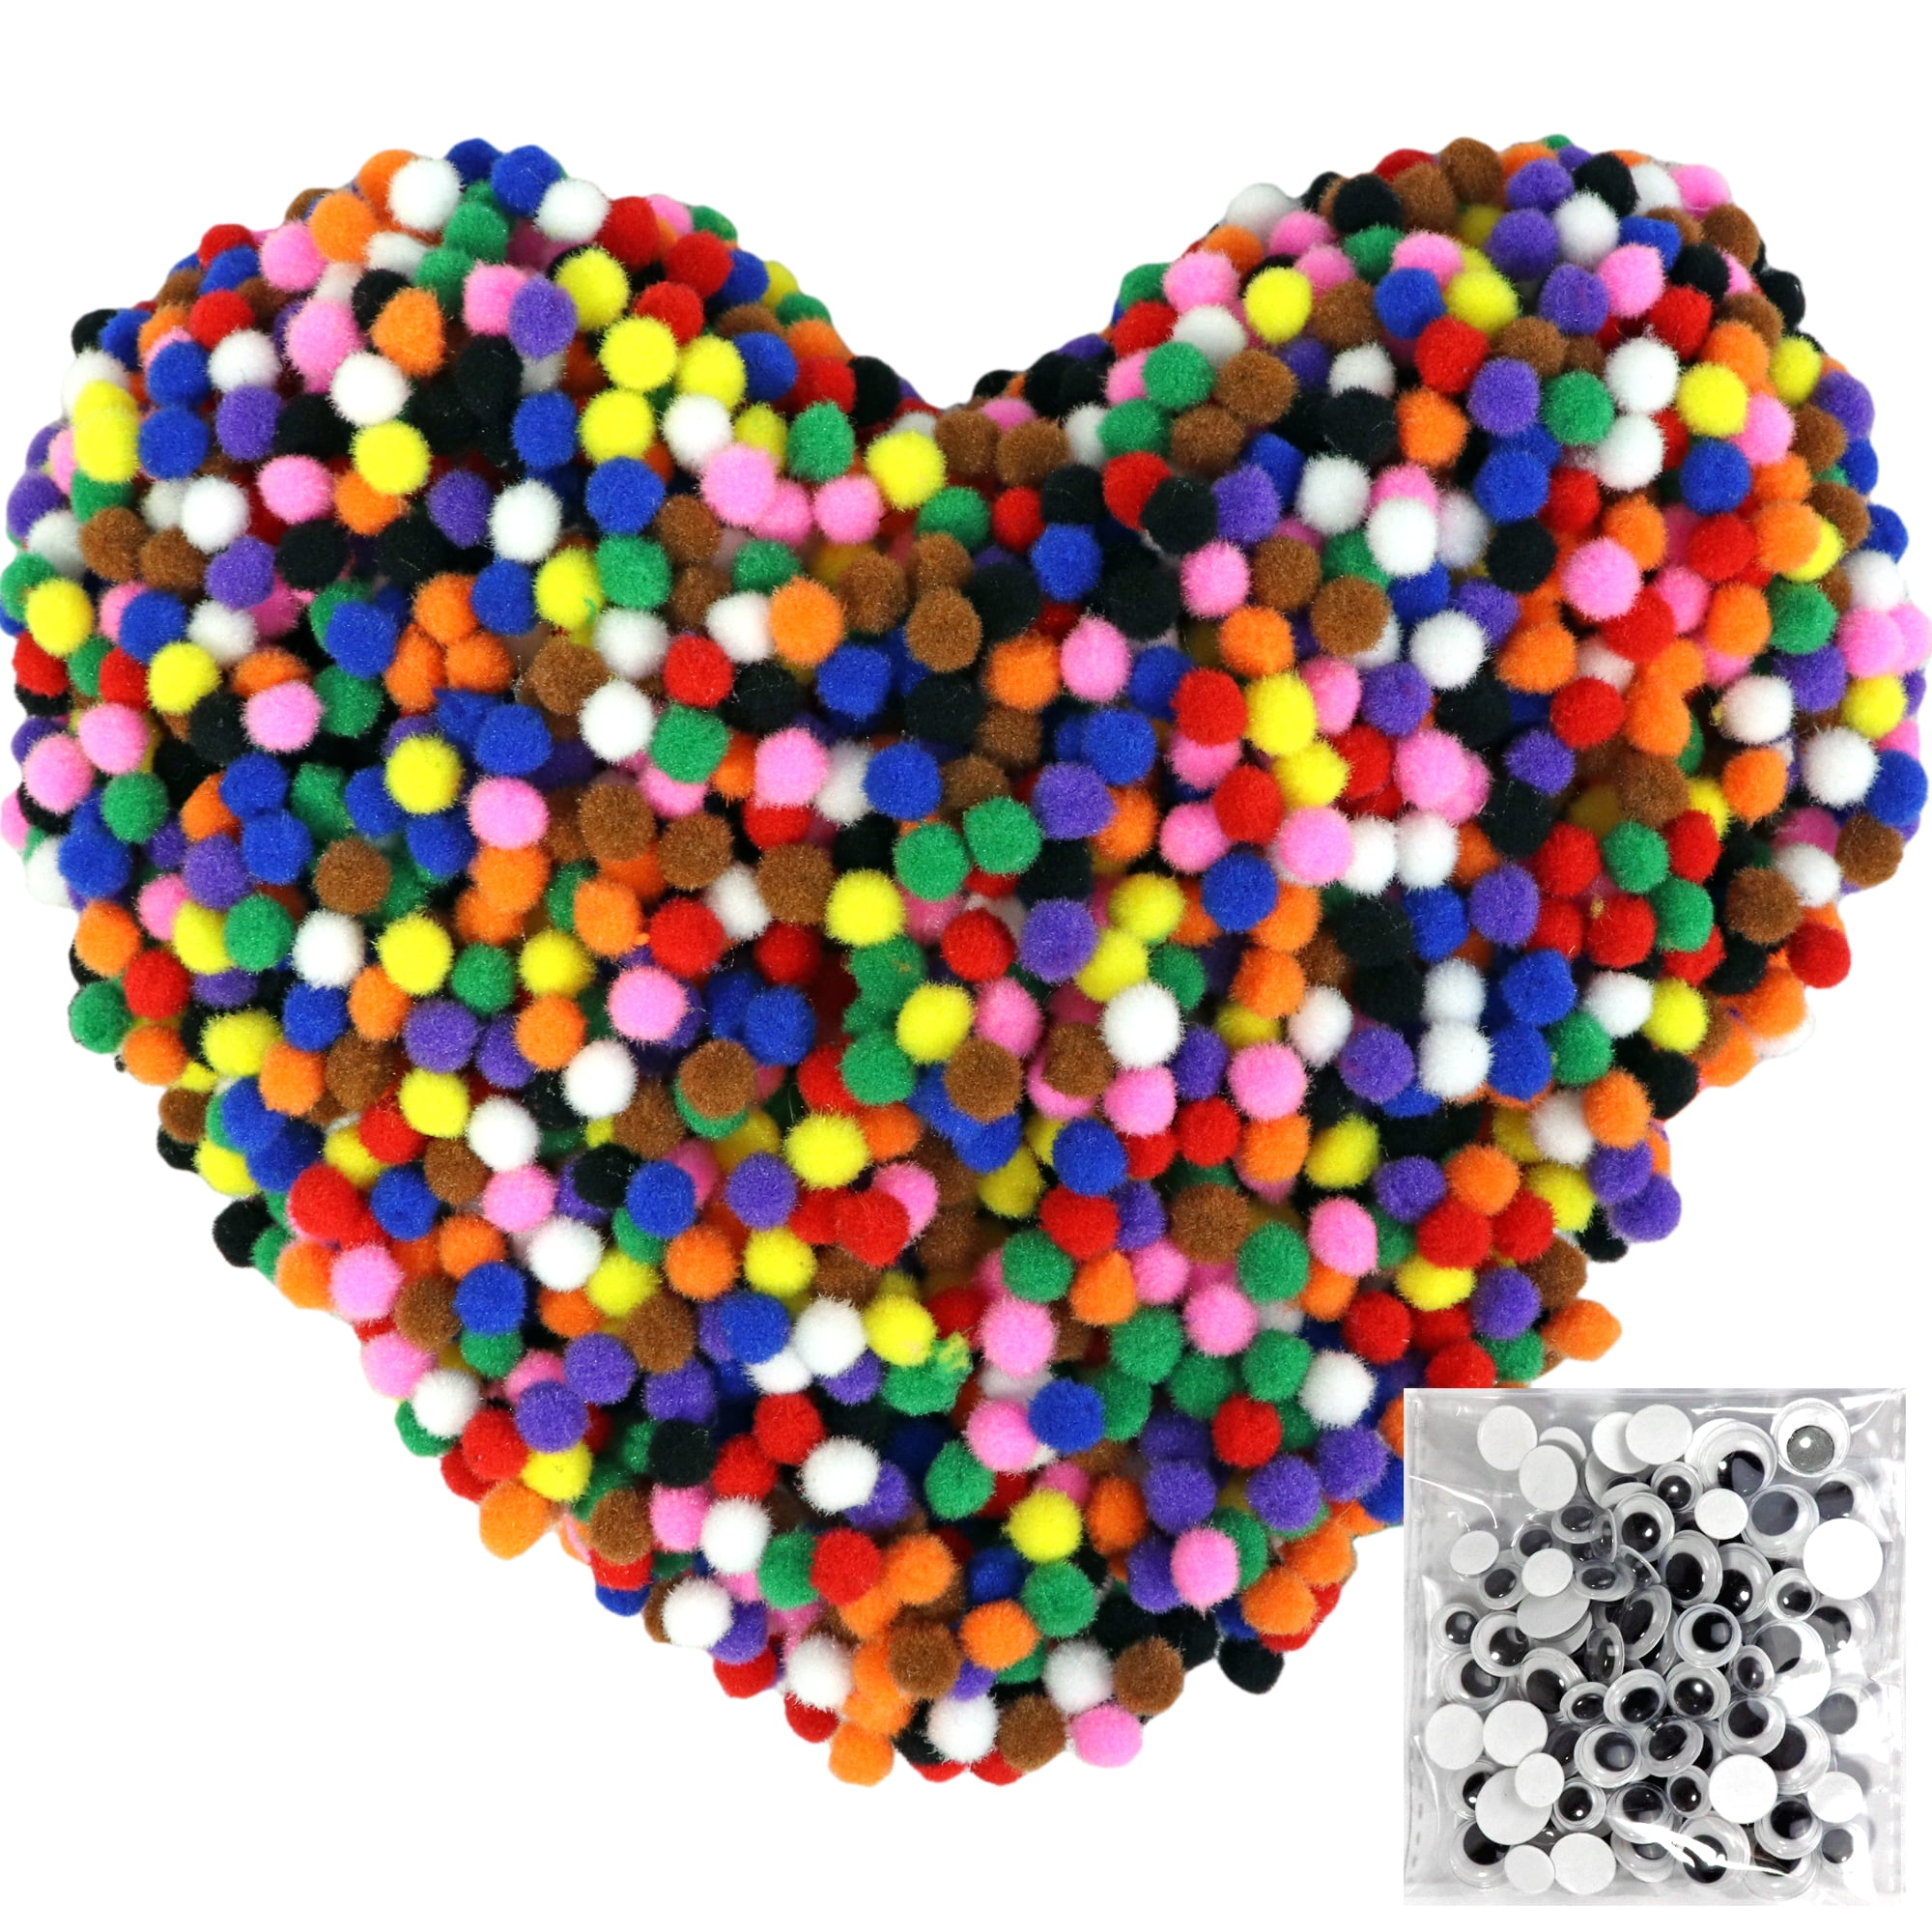 Cosweet 500pcs 1 inch Art Pom Poms Assorted Colorful Pom Poms for DIY Creative Crafts Decorations,Kids Craft Project, Home